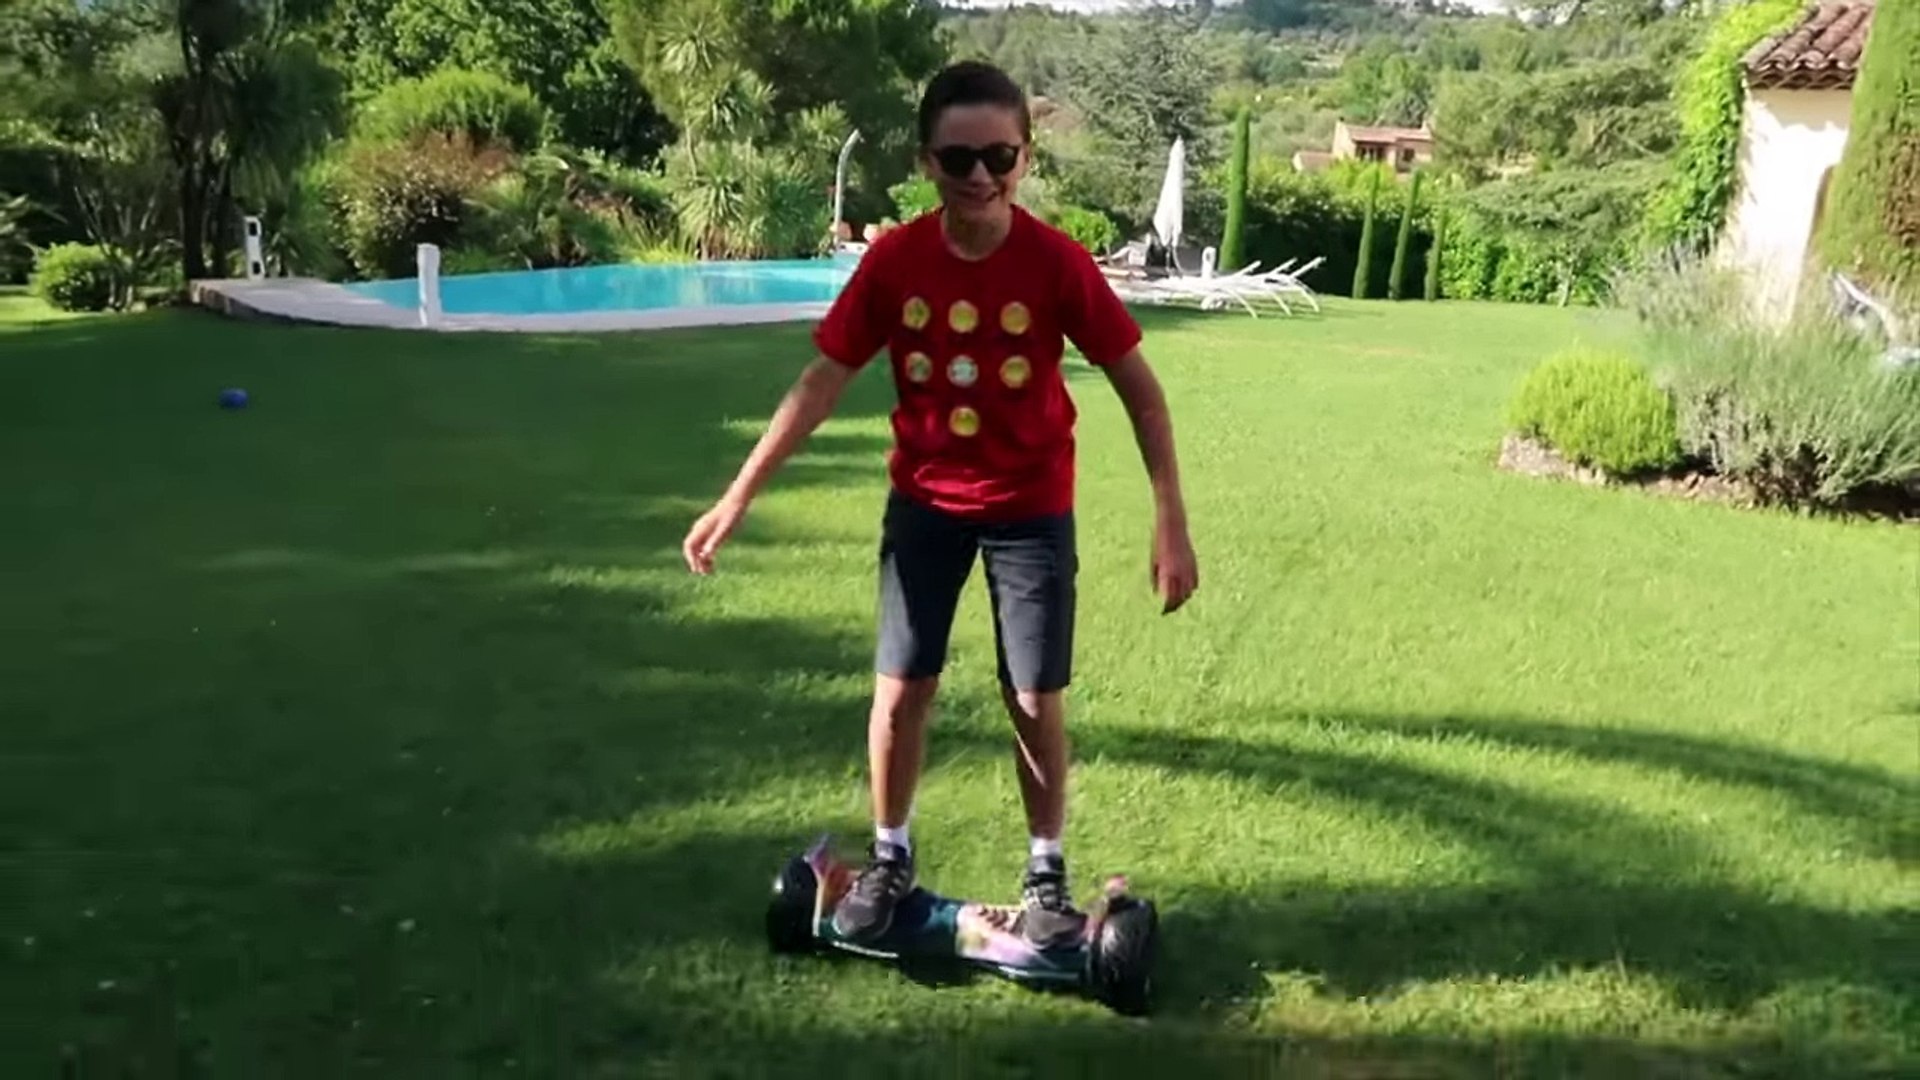 ON VOUS DONNE L'HOVERBOARD HUMMER 4X4 ! - Ft. WEGOBOARD - video Dailymotion